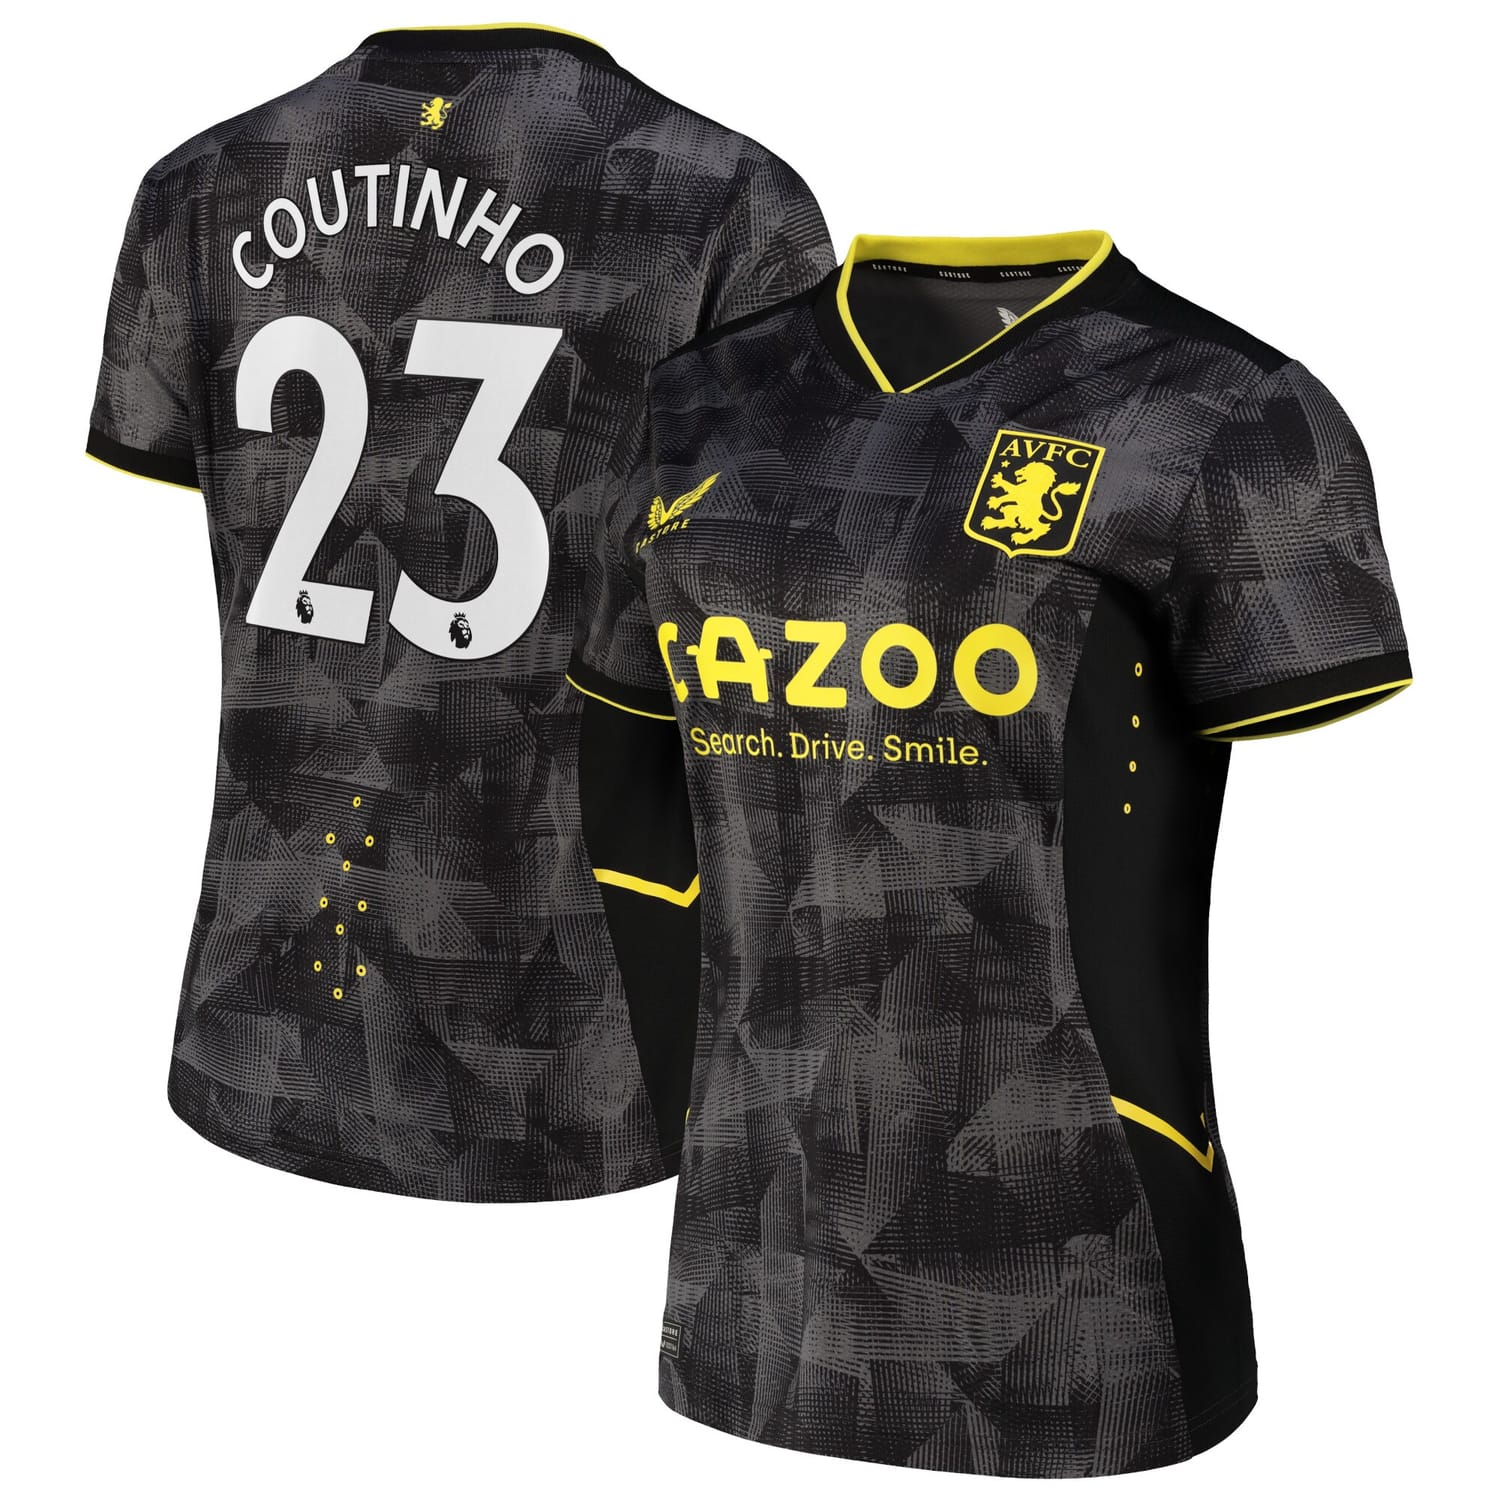 Premier League Ast. Villa Third Pro Jersey Shirt 2022-23 player Philippe Coutinho 23 printing for Women